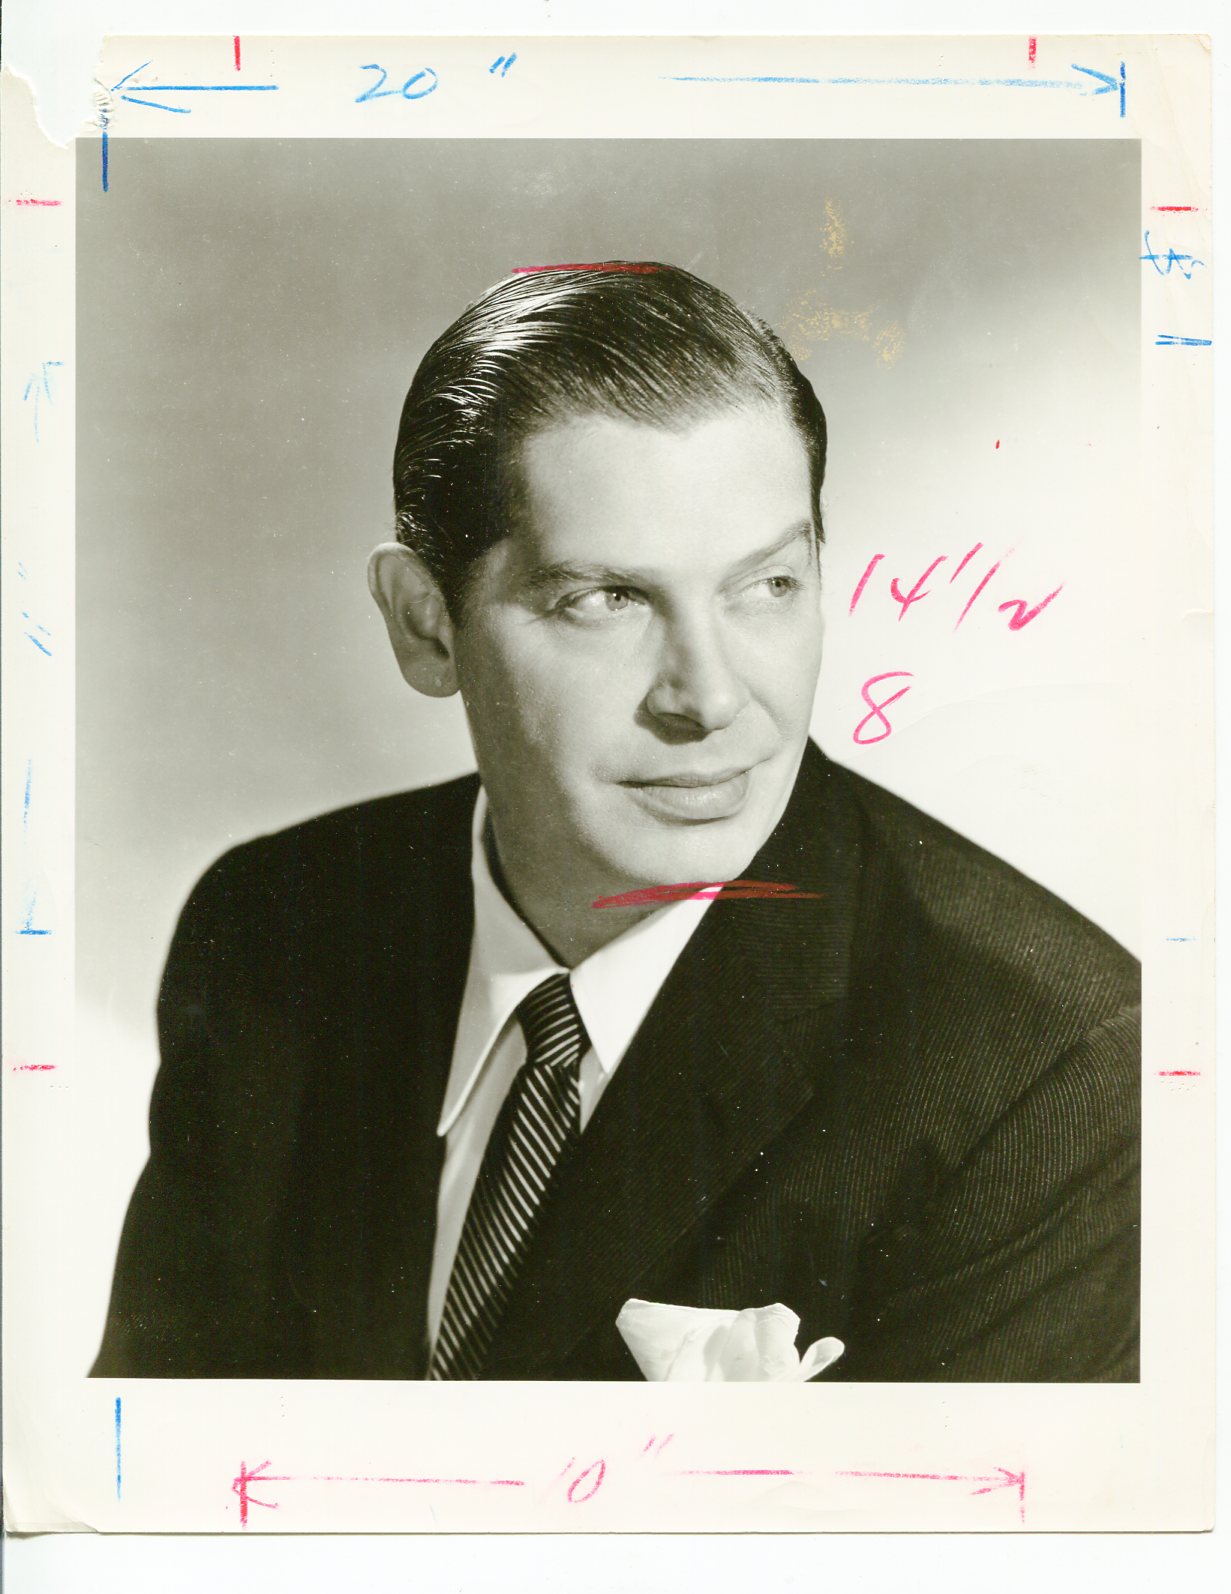 MILTON BERLE AMERICAN TELEVISION PIONEER COMEDIAN 8X10 PUBLICITY PHOTO AB-020 